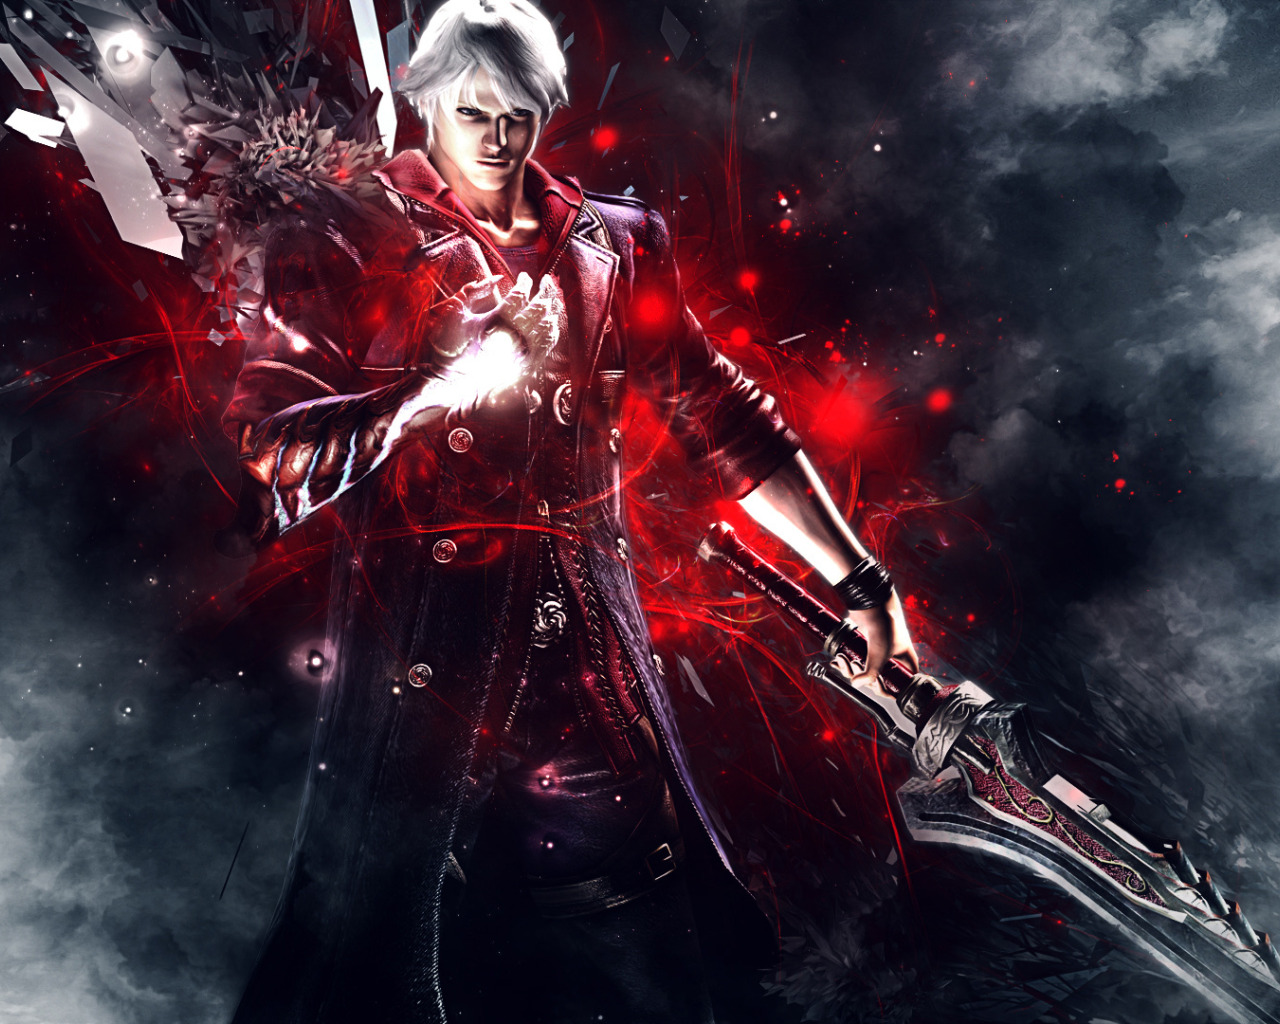 Devil may cry 4 on steam фото 63